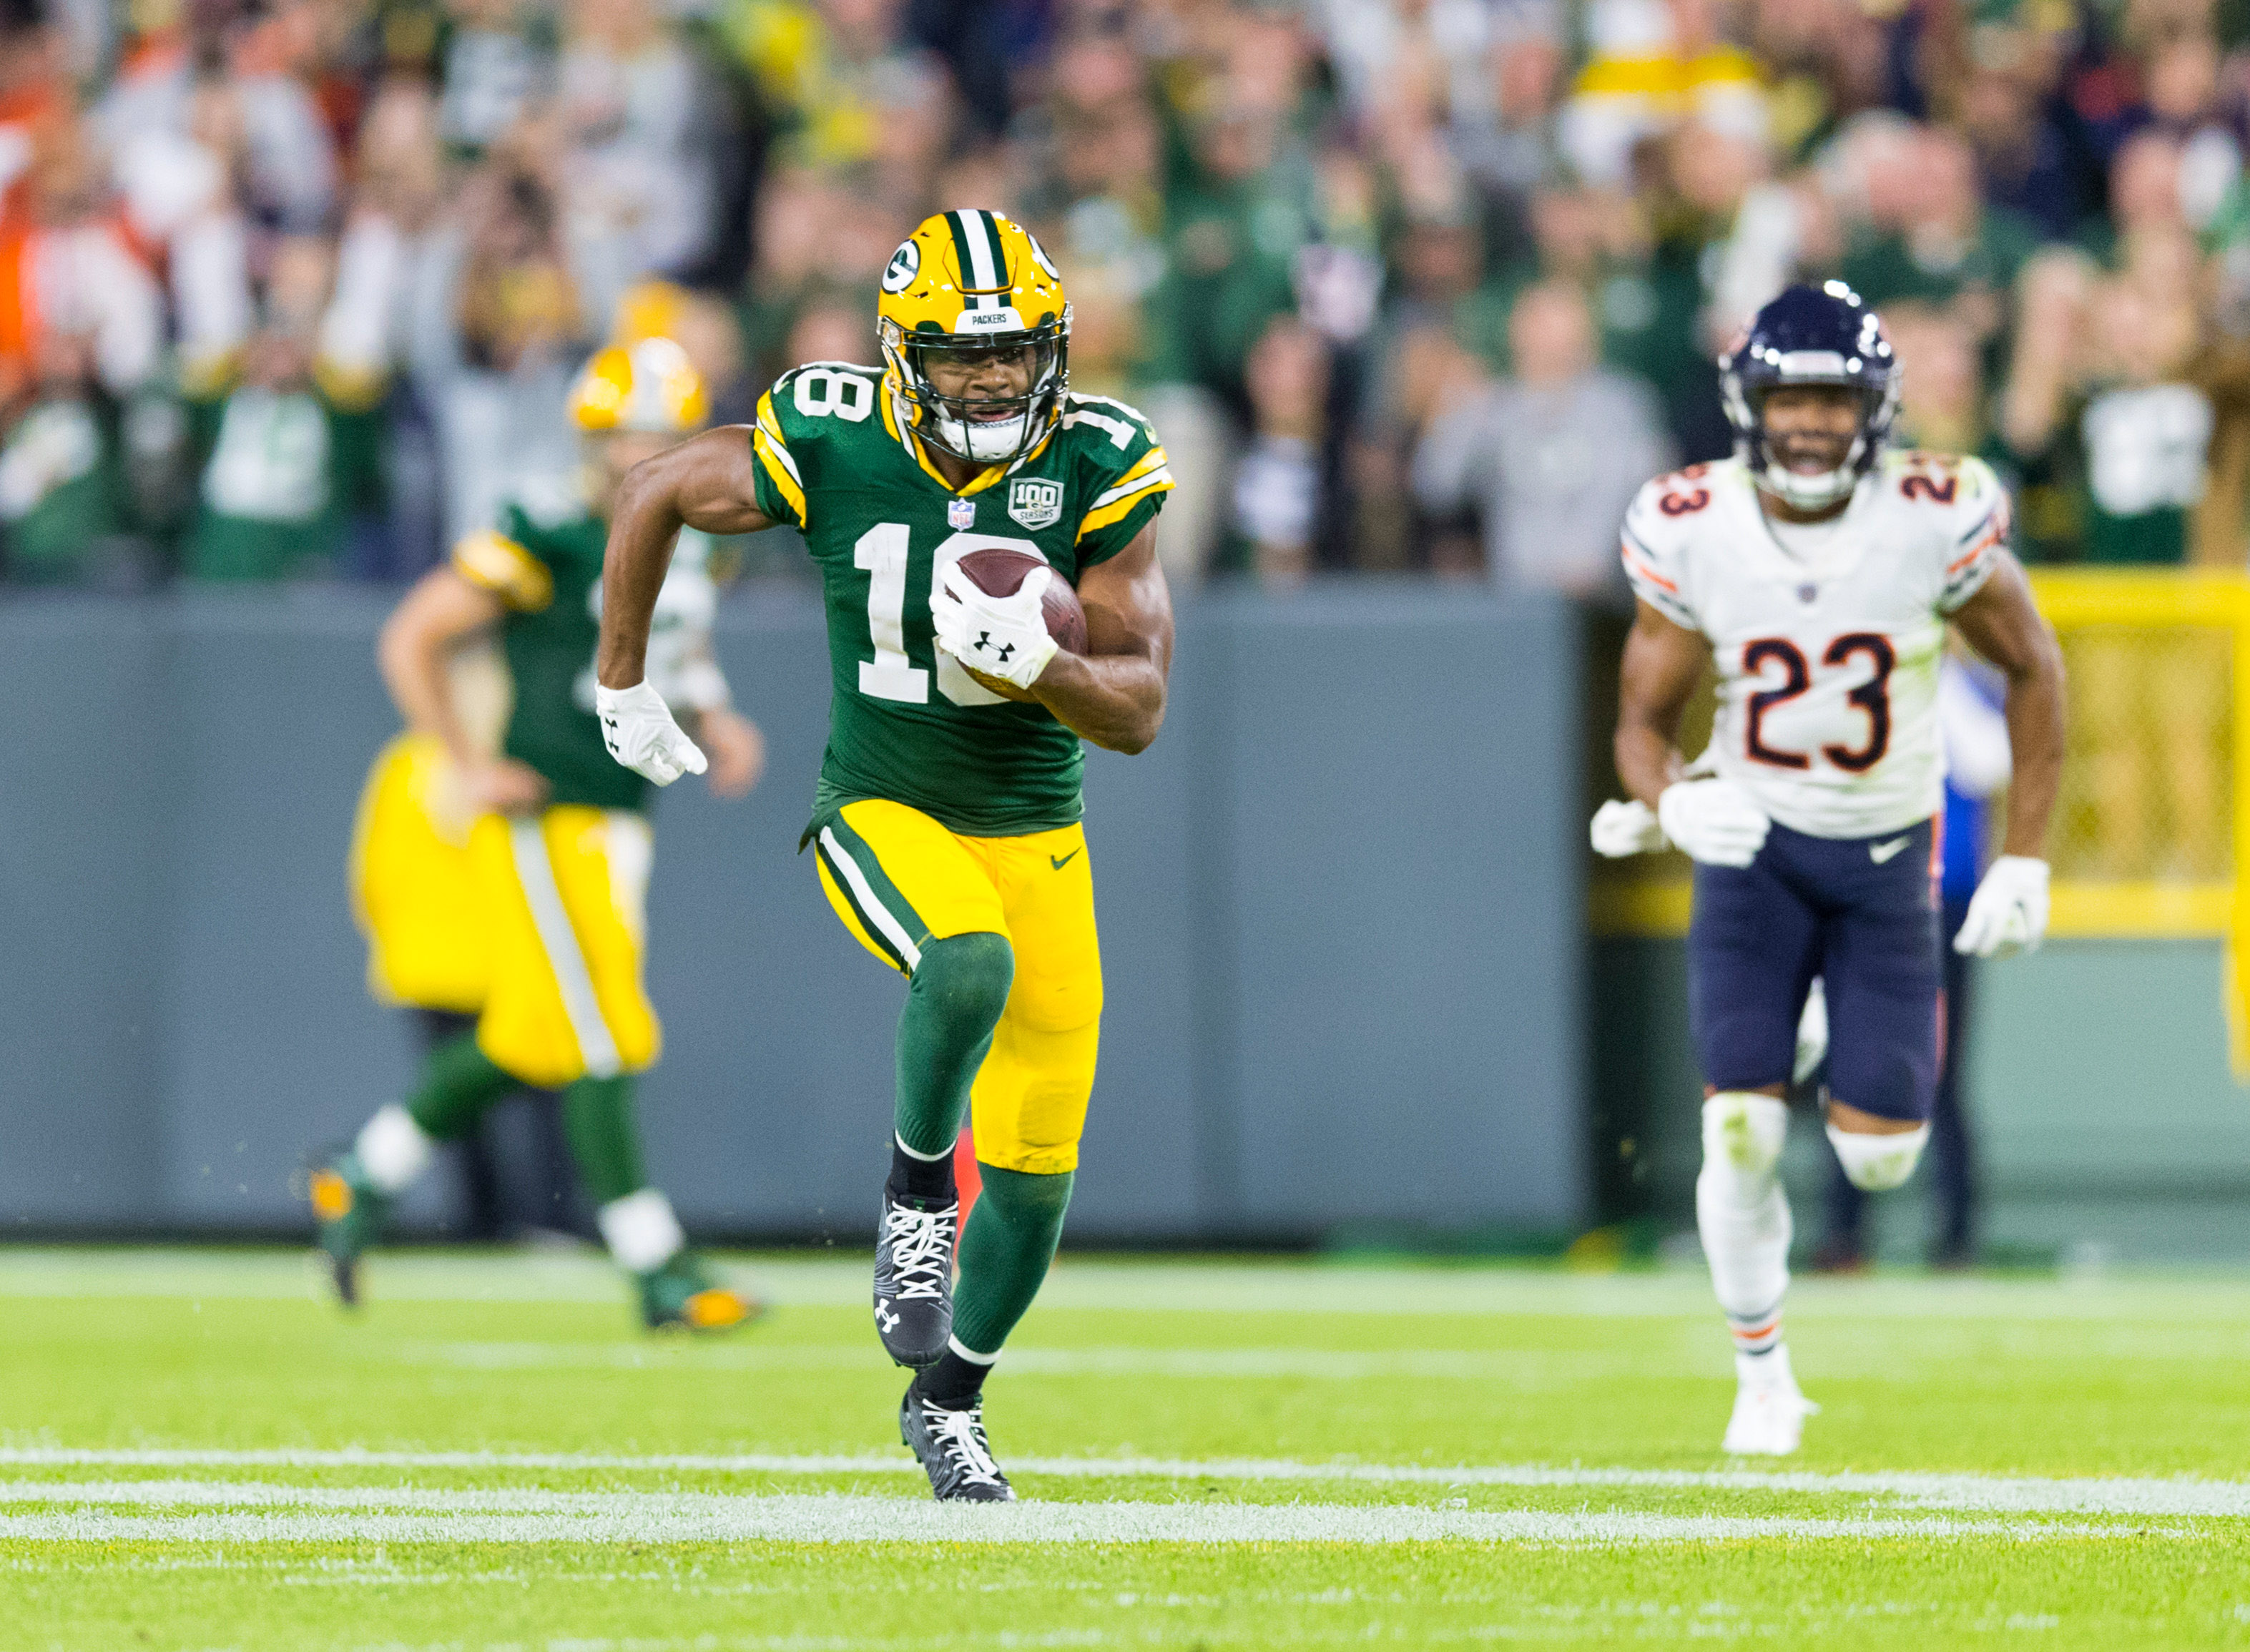 Injuries: Randall Cobb ruled out for Packers on Sunday